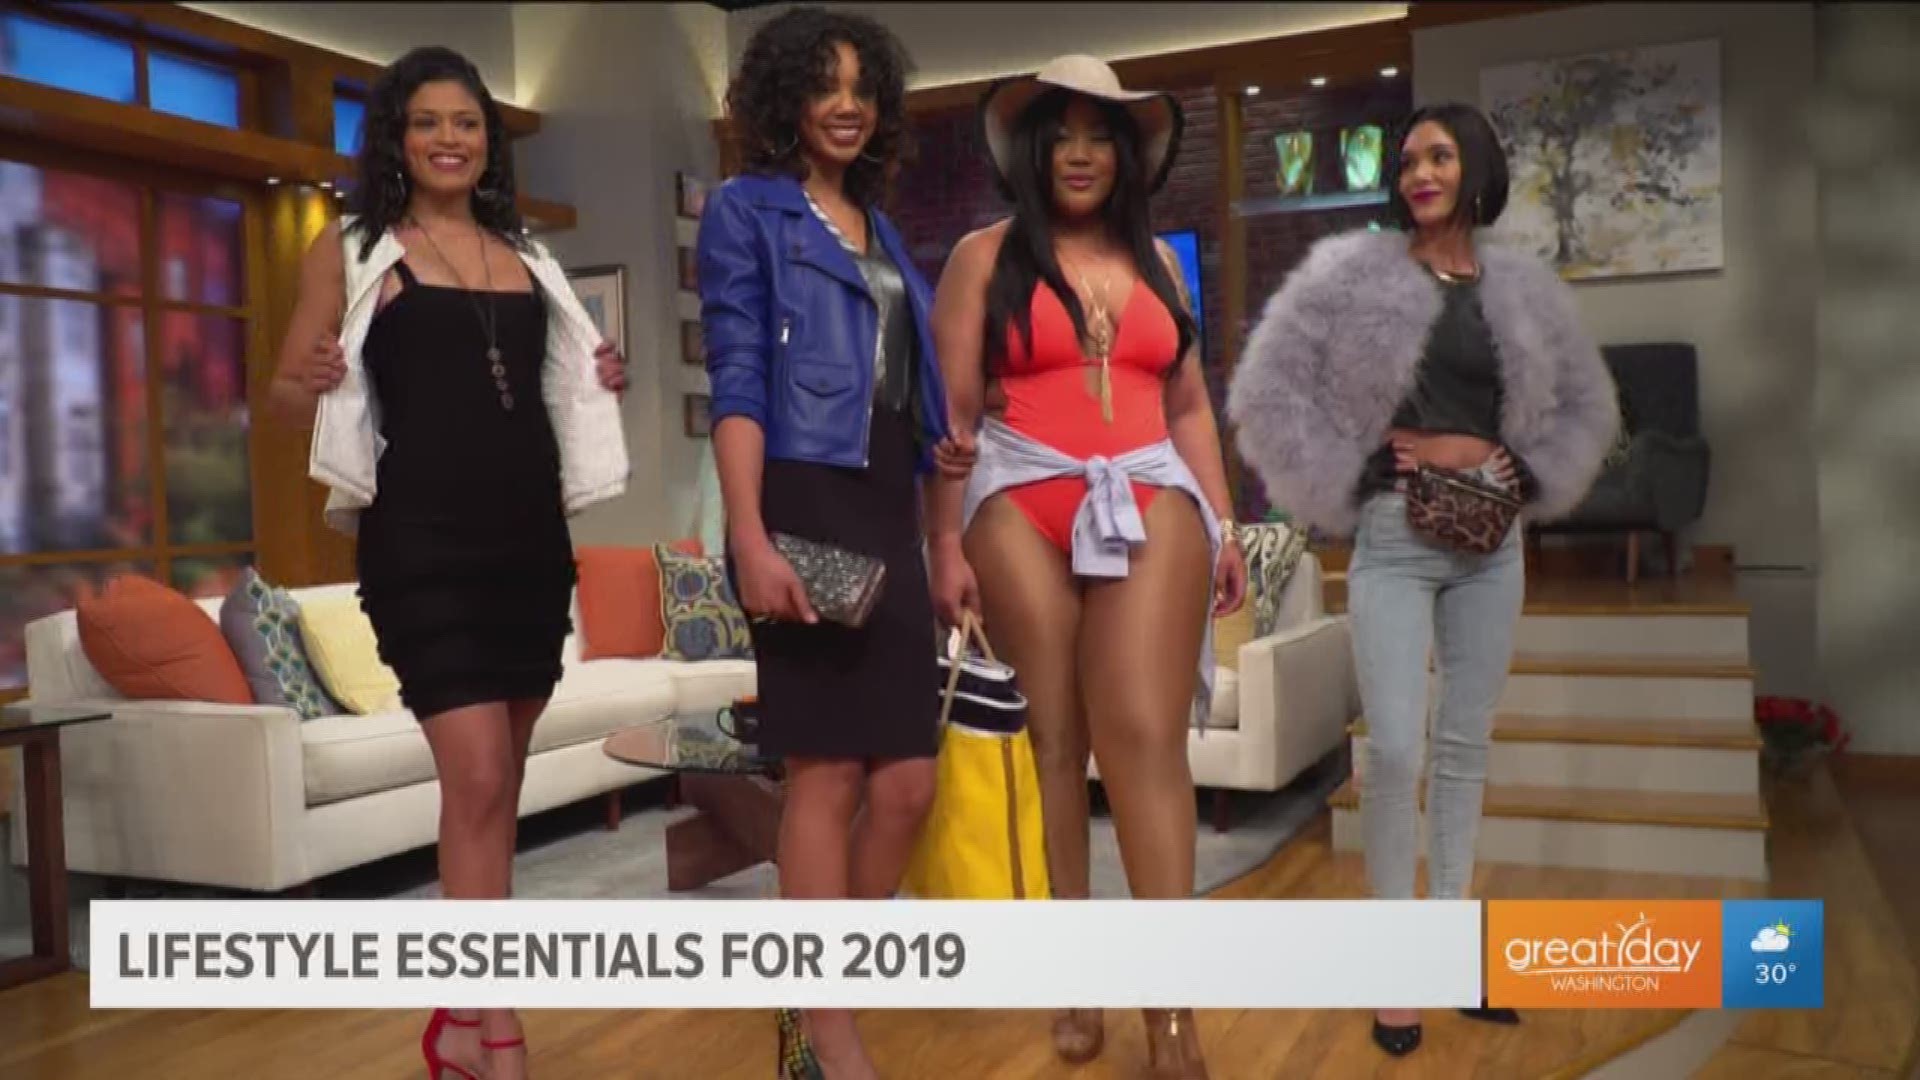 Courtney Rae O'Neal, founder of DC's premier image consulting firm 'Courted', shows us which stylish looks are going to rule 2019!